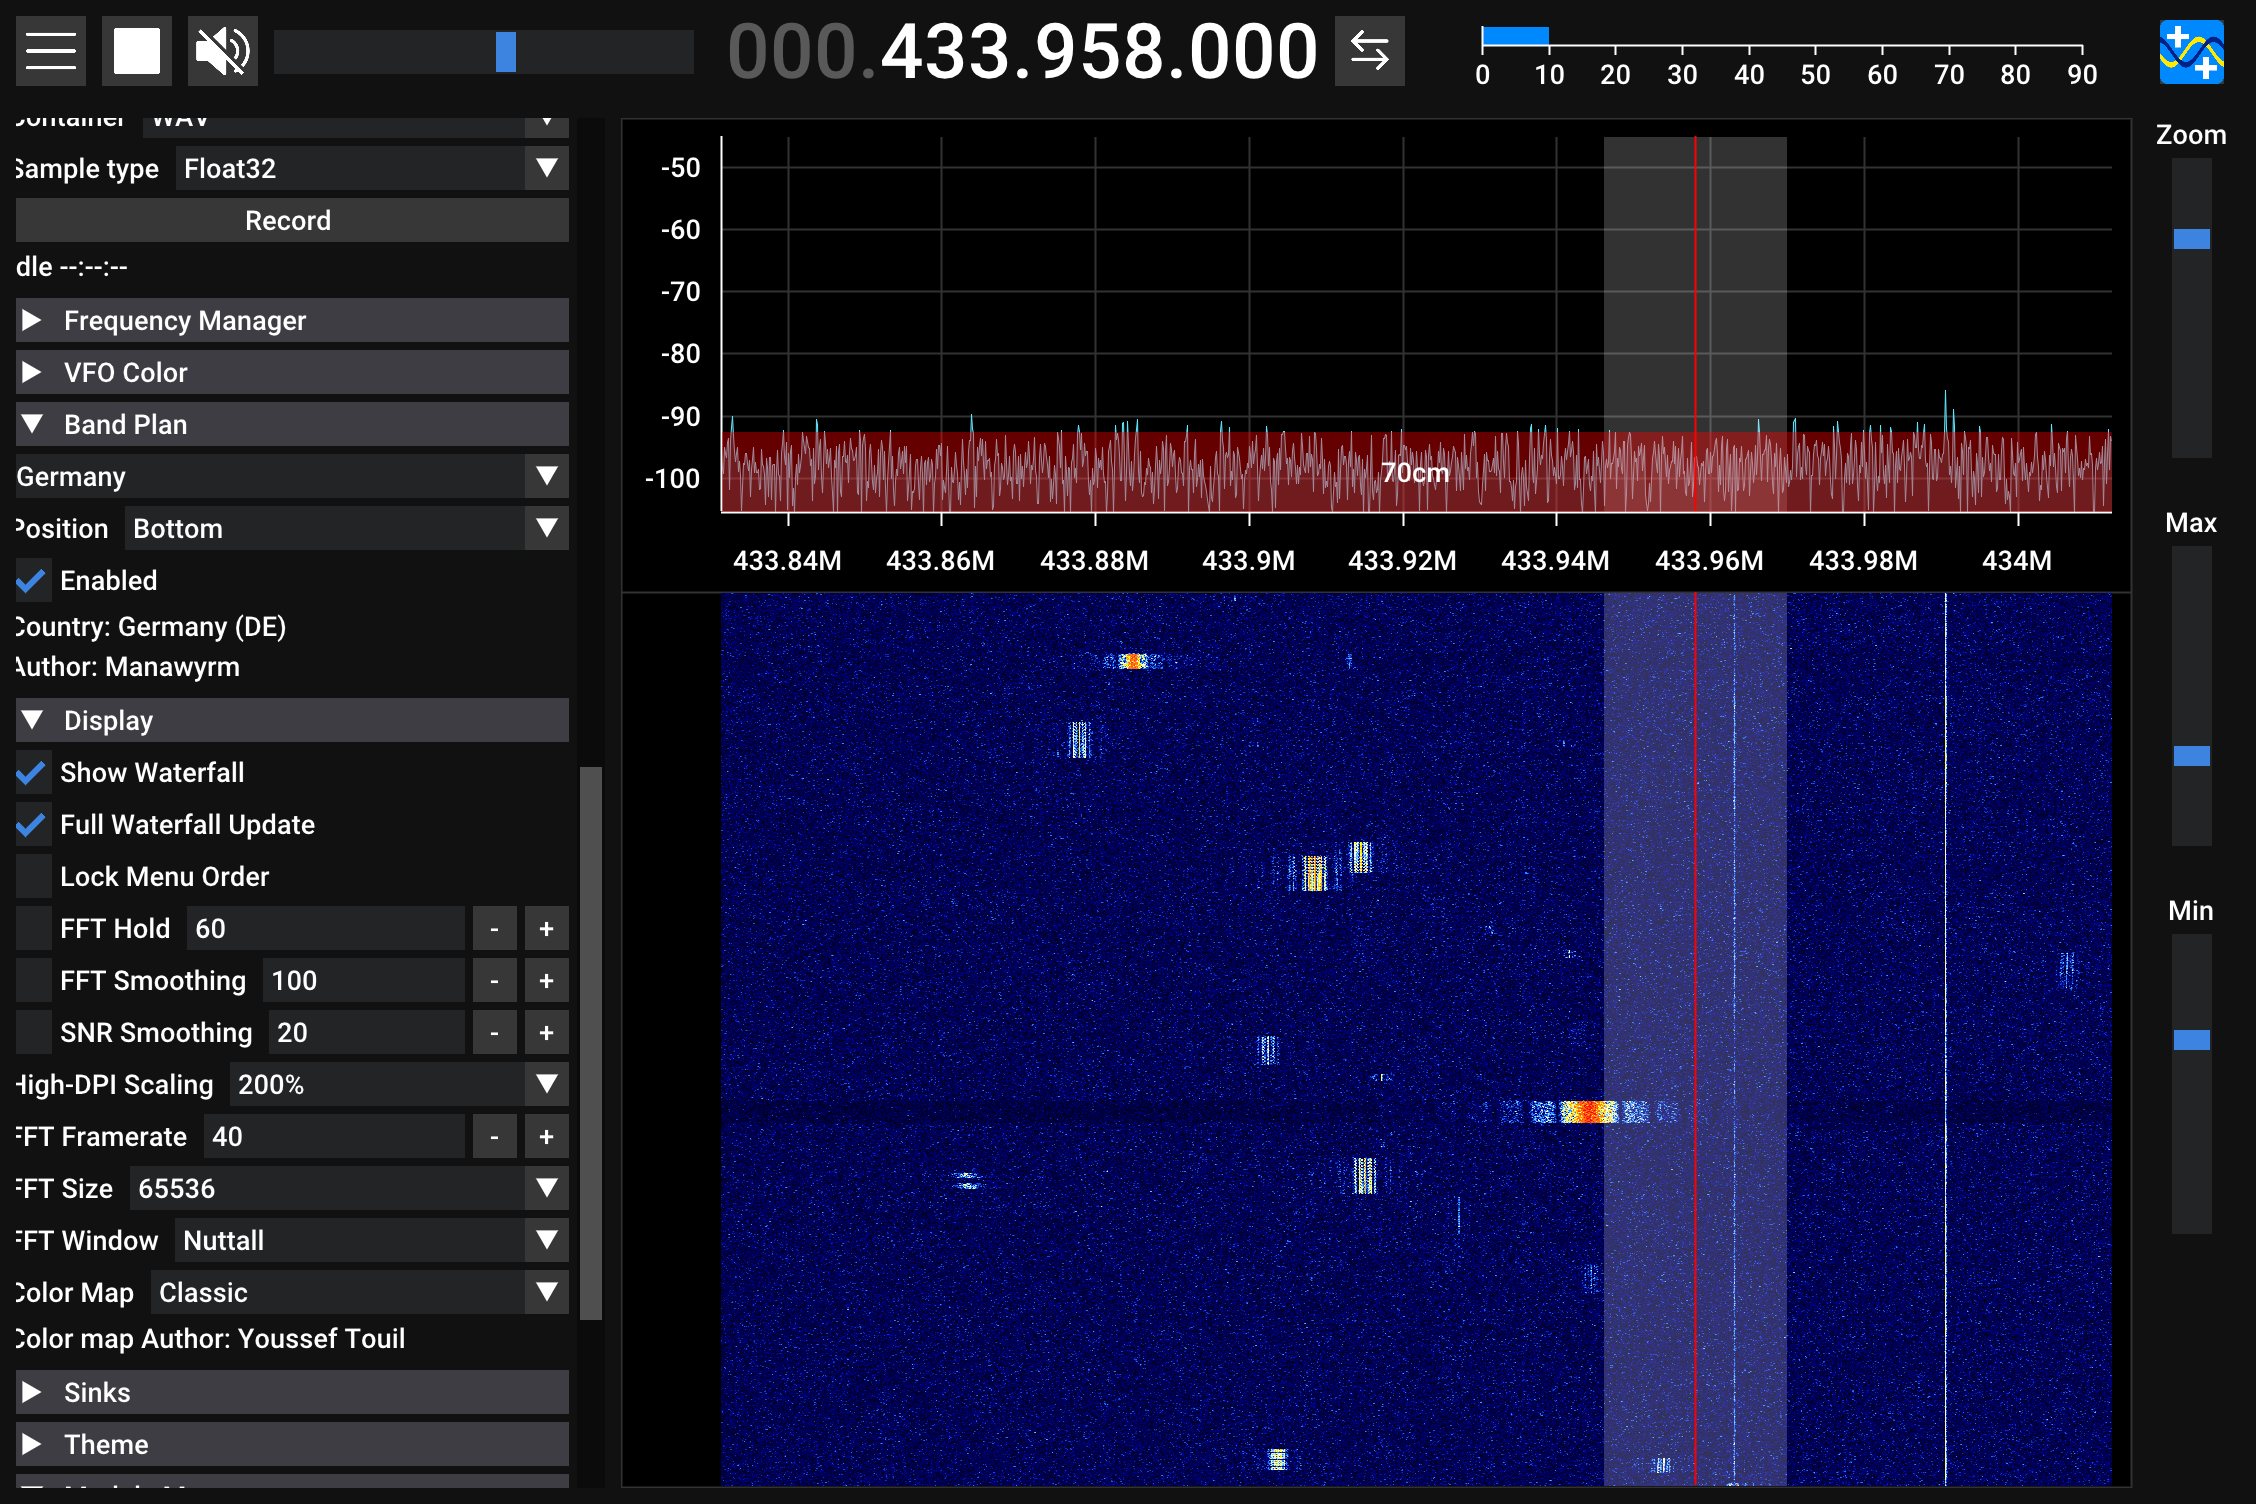 Short signal bursts in the frequency spectrum, at different frequencies around 433 MHz.